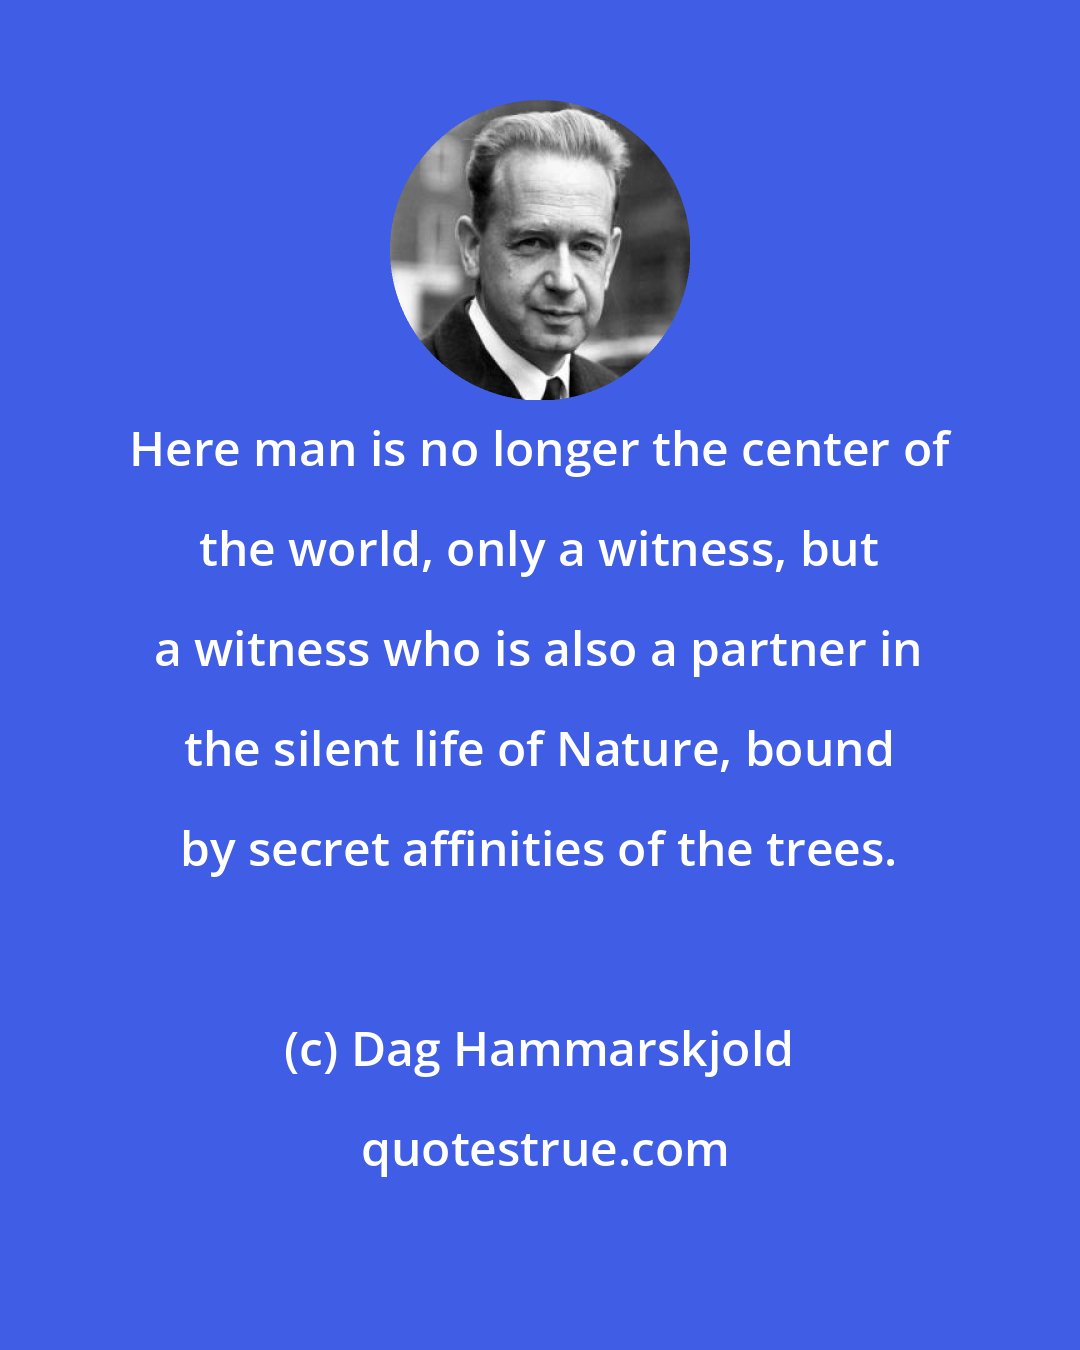 Dag Hammarskjold: Here man is no longer the center of the world, only a witness, but a witness who is also a partner in the silent life of Nature, bound by secret affinities of the trees.